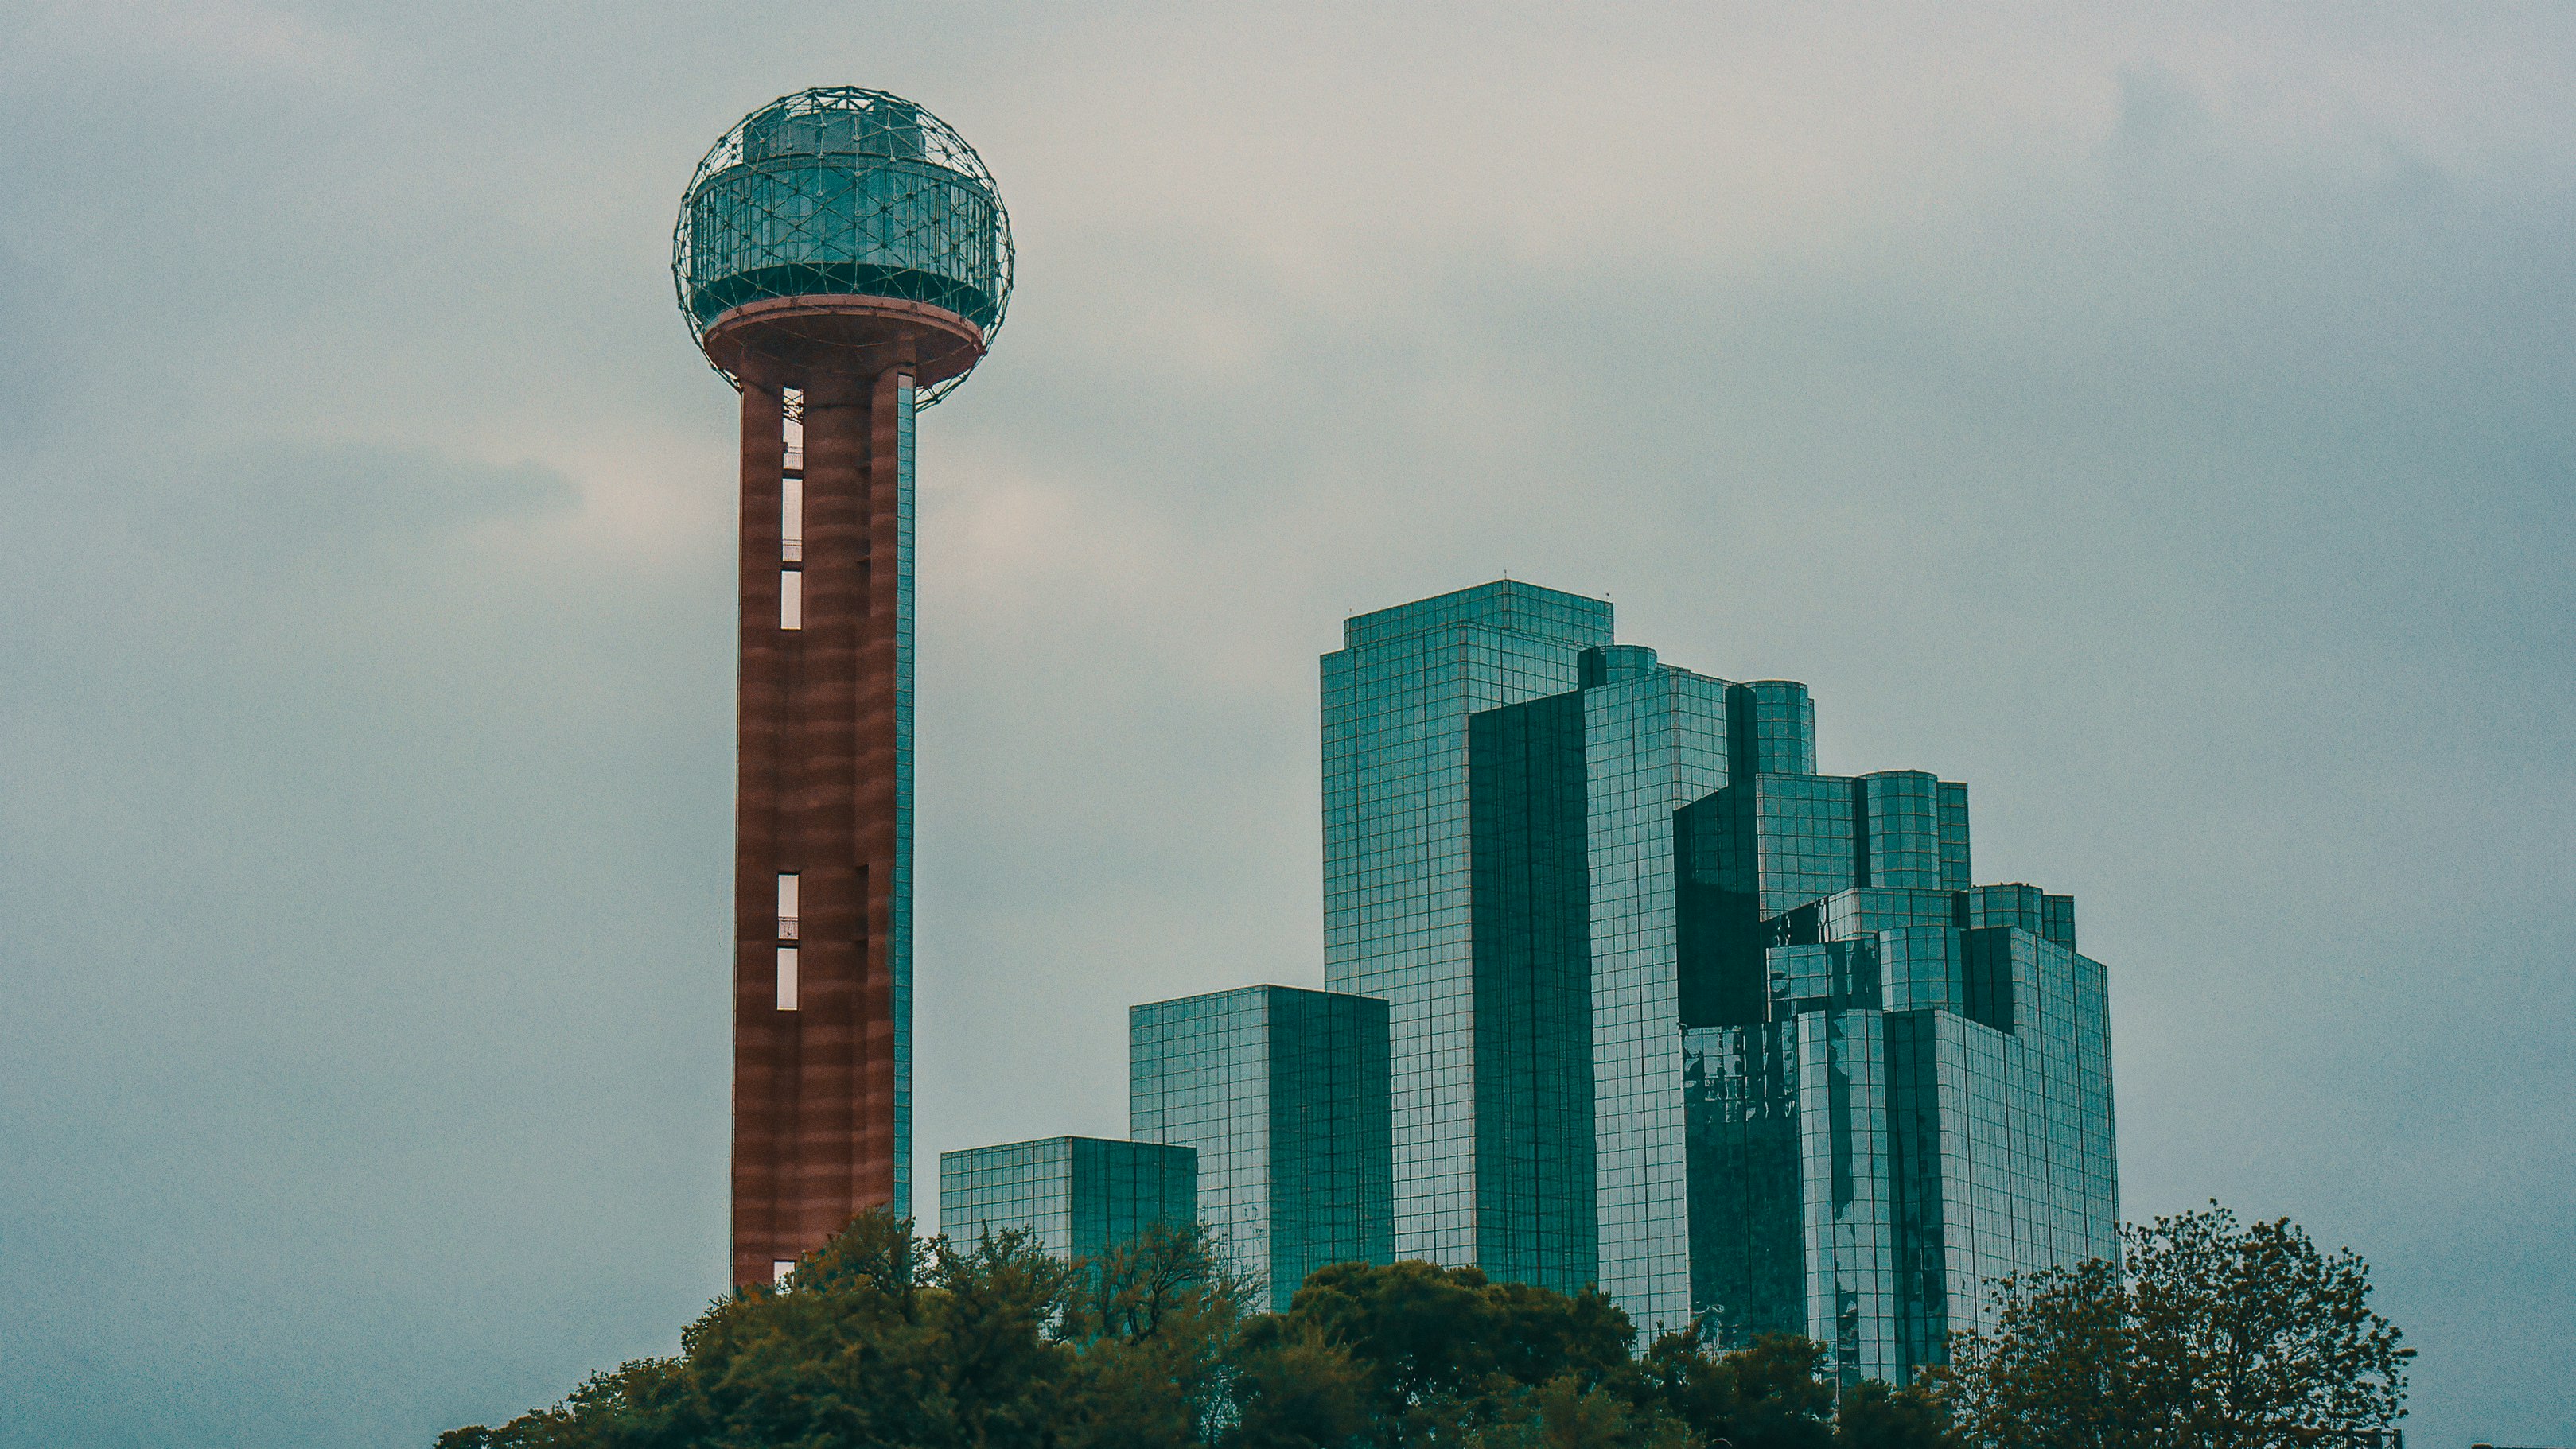 Reunion Tower stands tall over the Hyatt Regency Hotel (May, 2009).